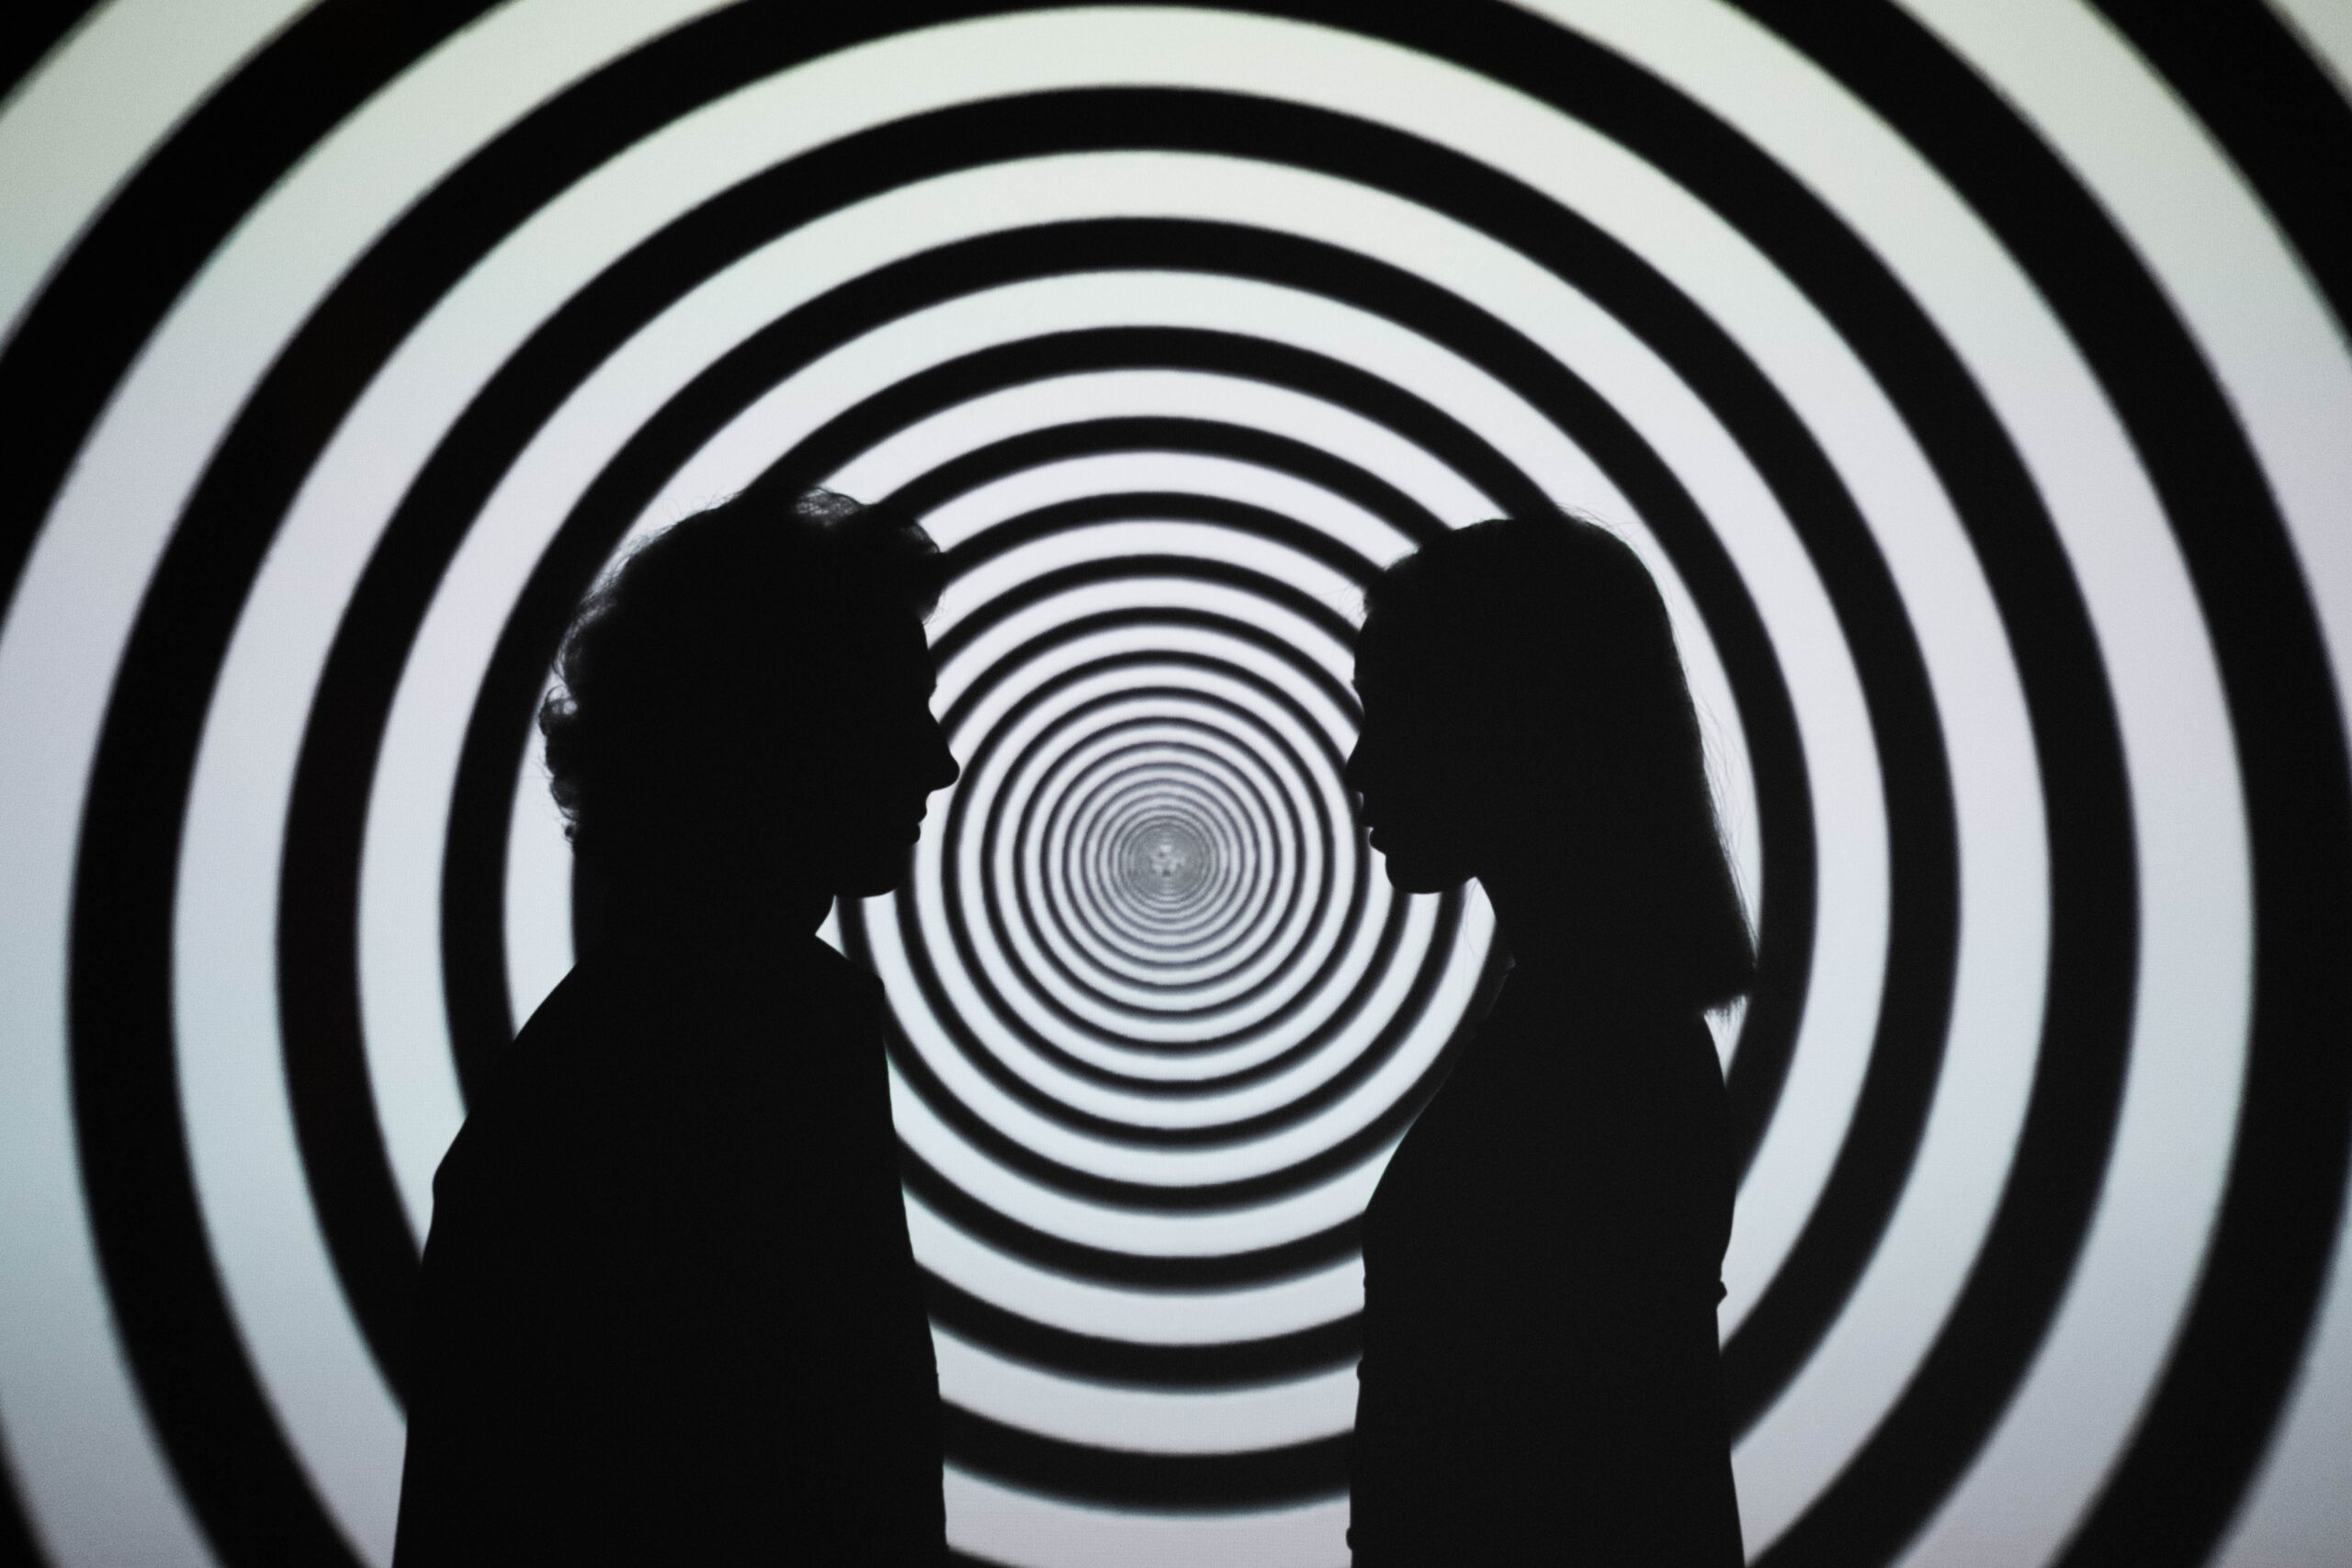 Is it legal to hypnotize someone without consent?